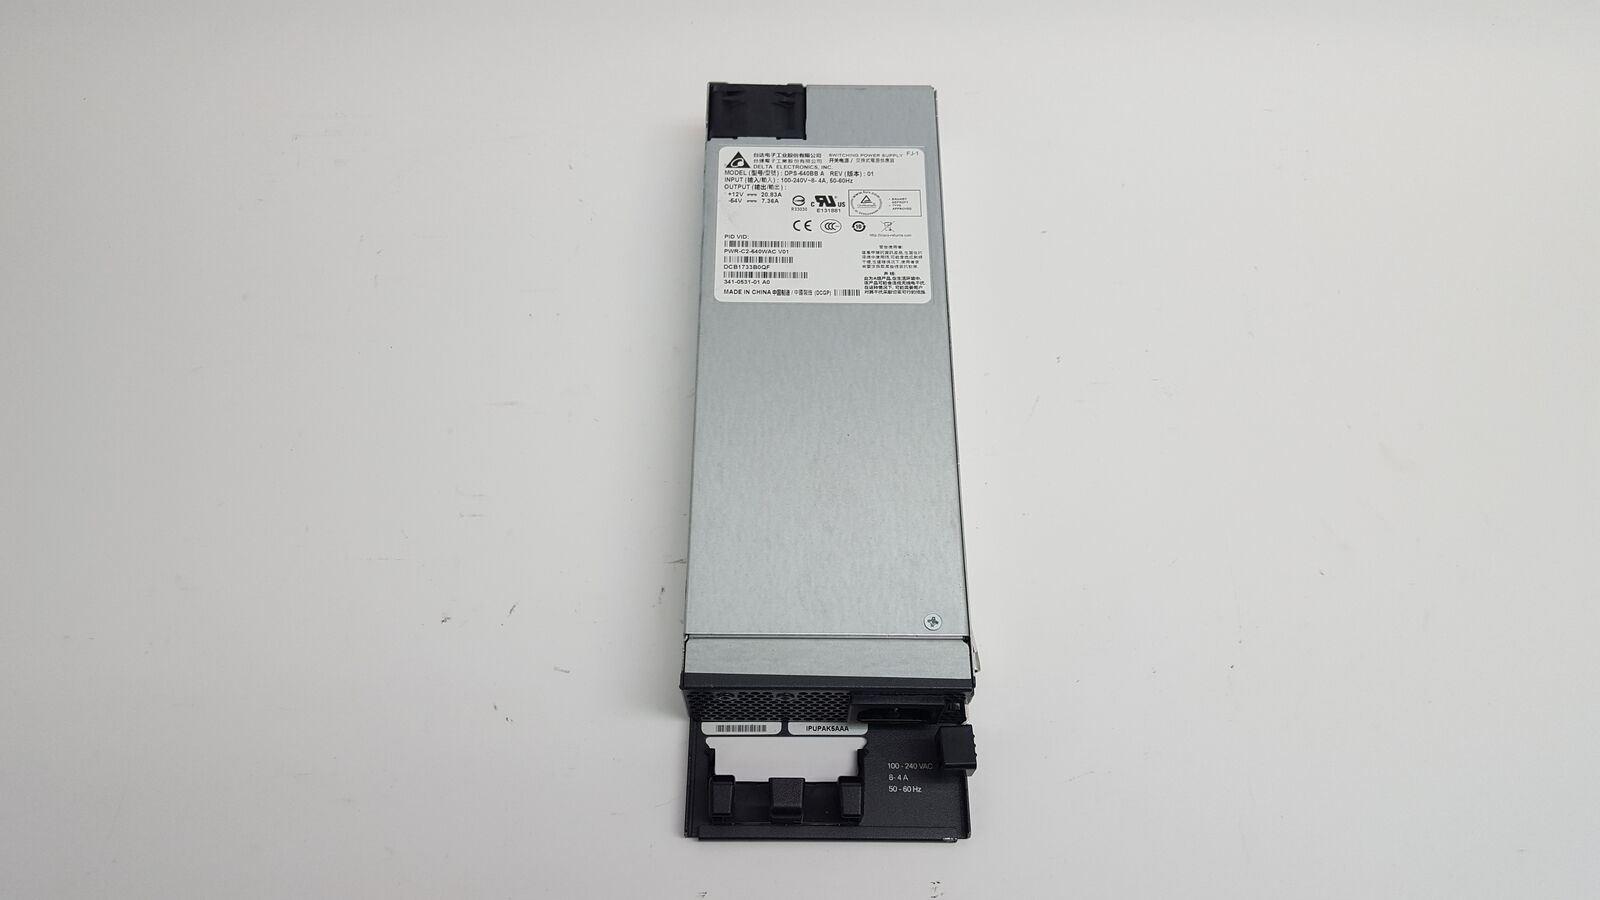 PA 2641 1 LF DPS 640BB 341 0531 01 cisco 341 0531 01 power supply plug in module ac 100 240 v 640 watt for catalyst 2960xr 24pd i 2960xr 24ps i 2960xr 48lpd i 2960xr 48lps i switches